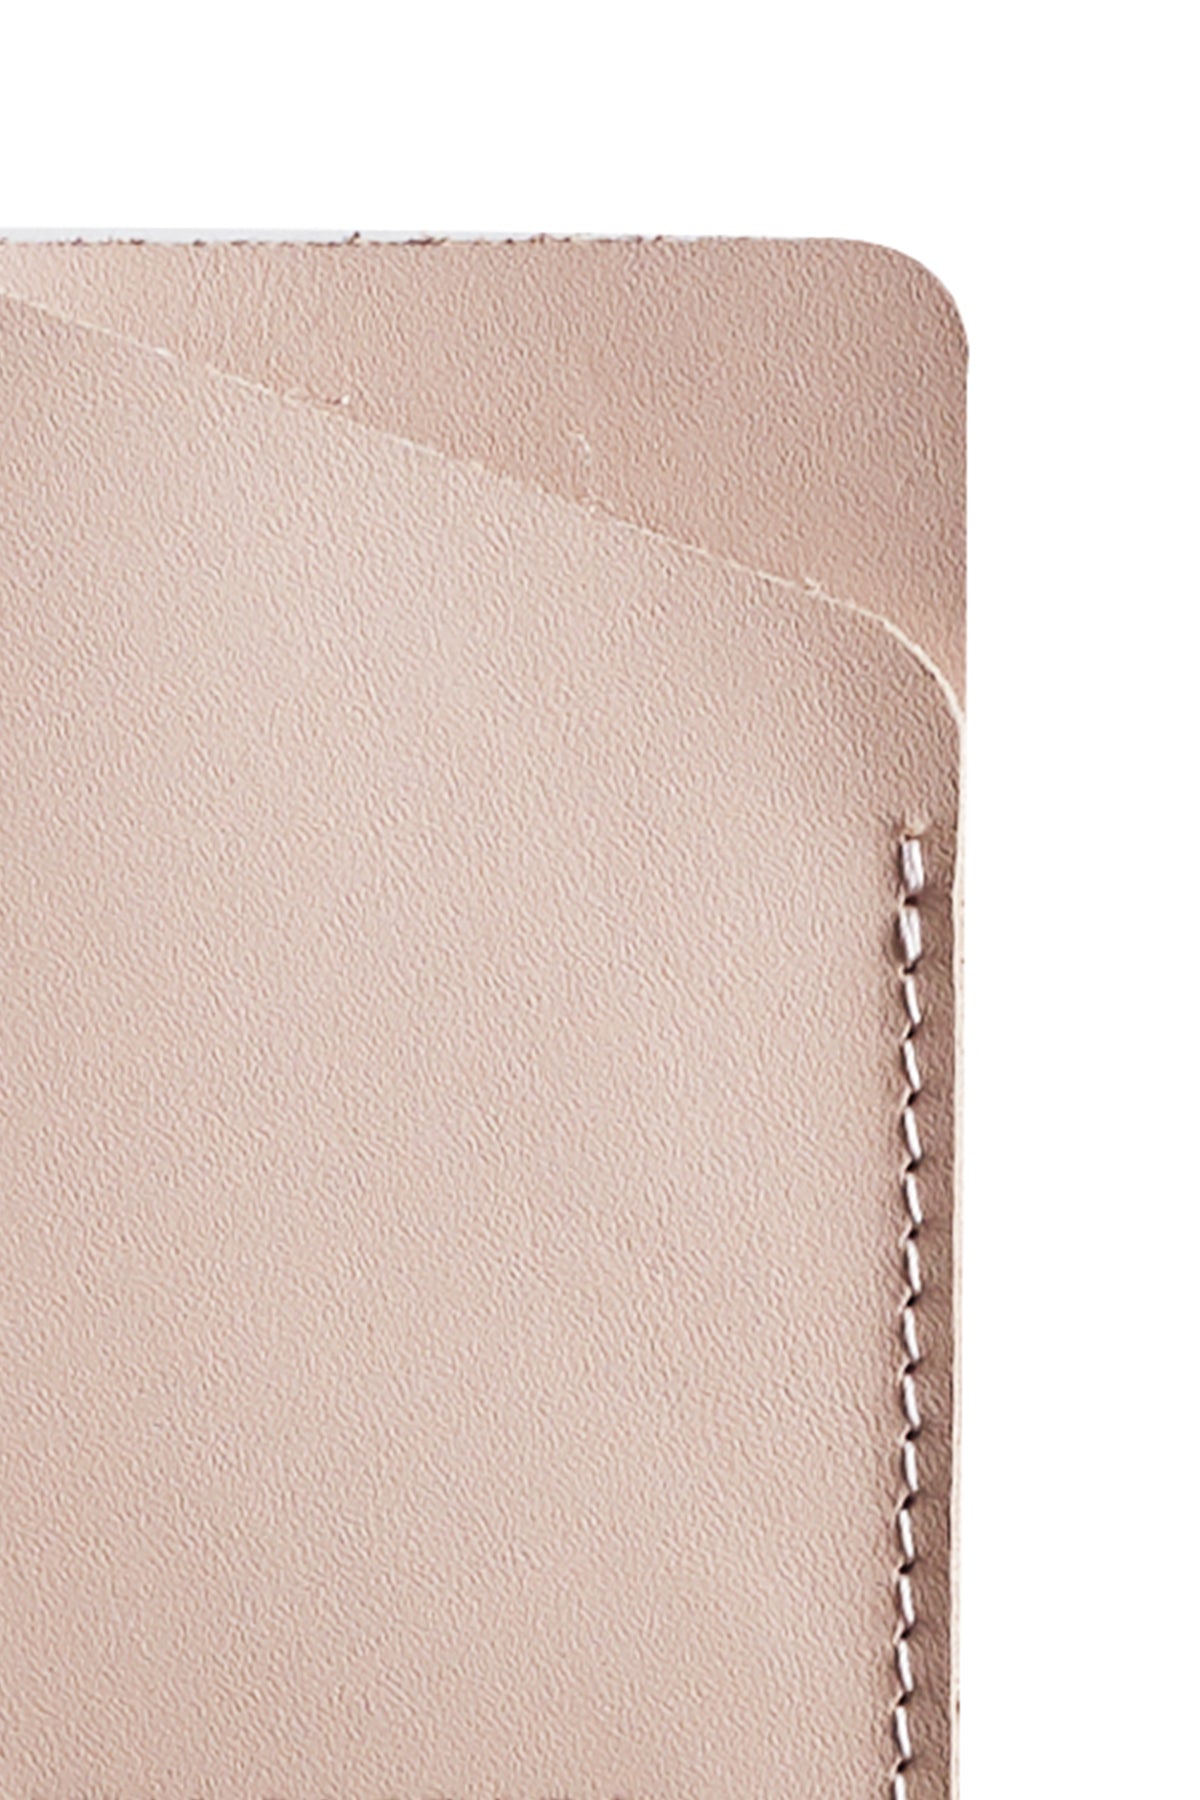 A beige SOFT LEATHER CARD HOLDER BY LIMA SAGRADA with a minimalist zipper, crafted by local artisans.-600106729553